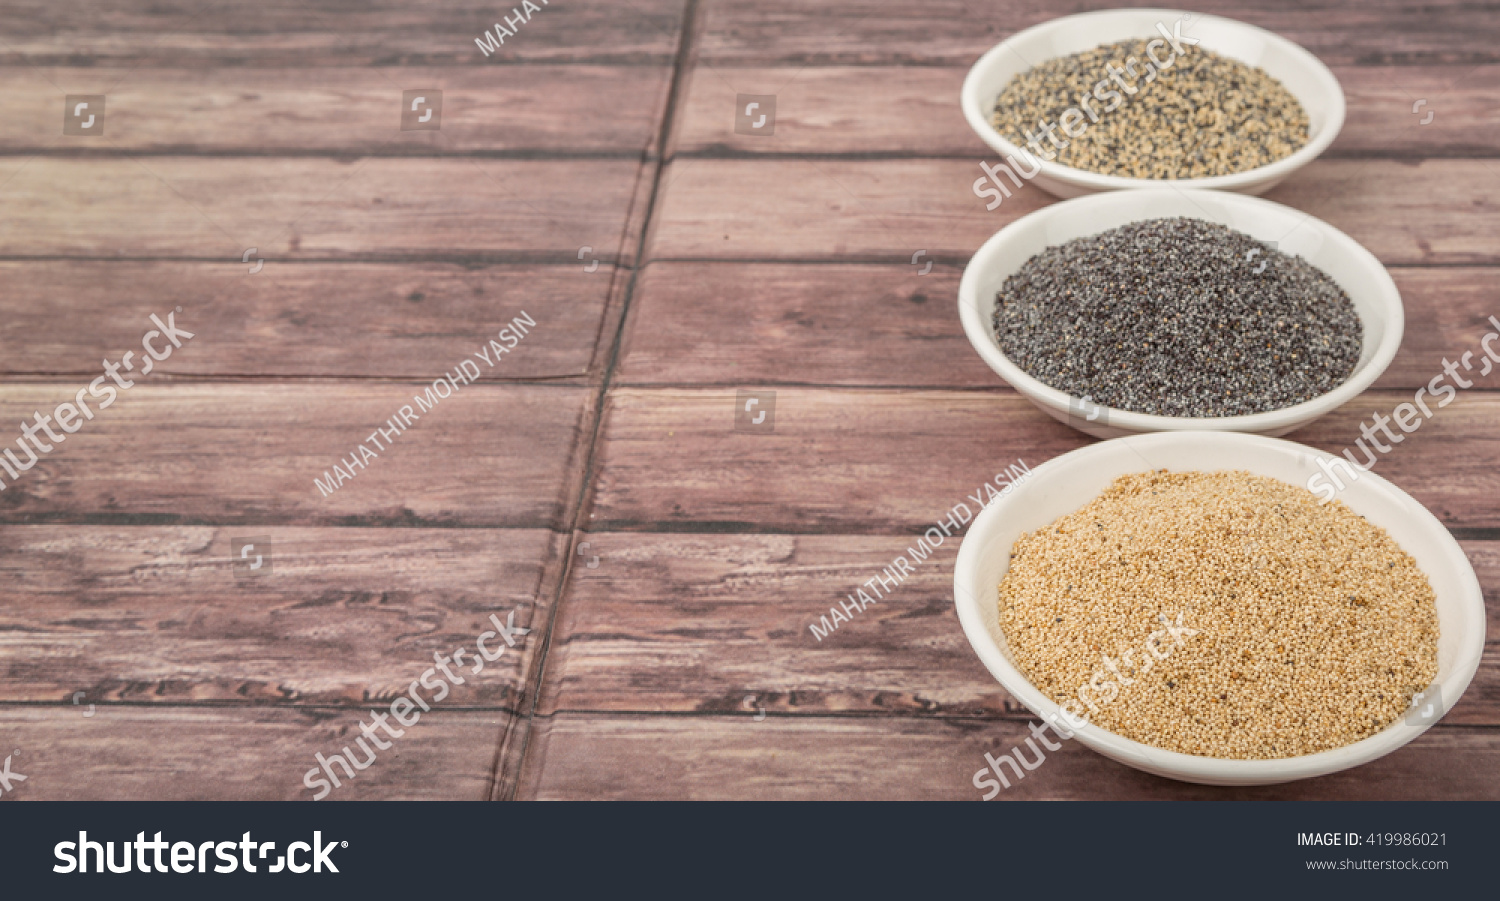 White poppy seed, black poppy seed and mix poppy seed in white bowls over wooden background #419986021